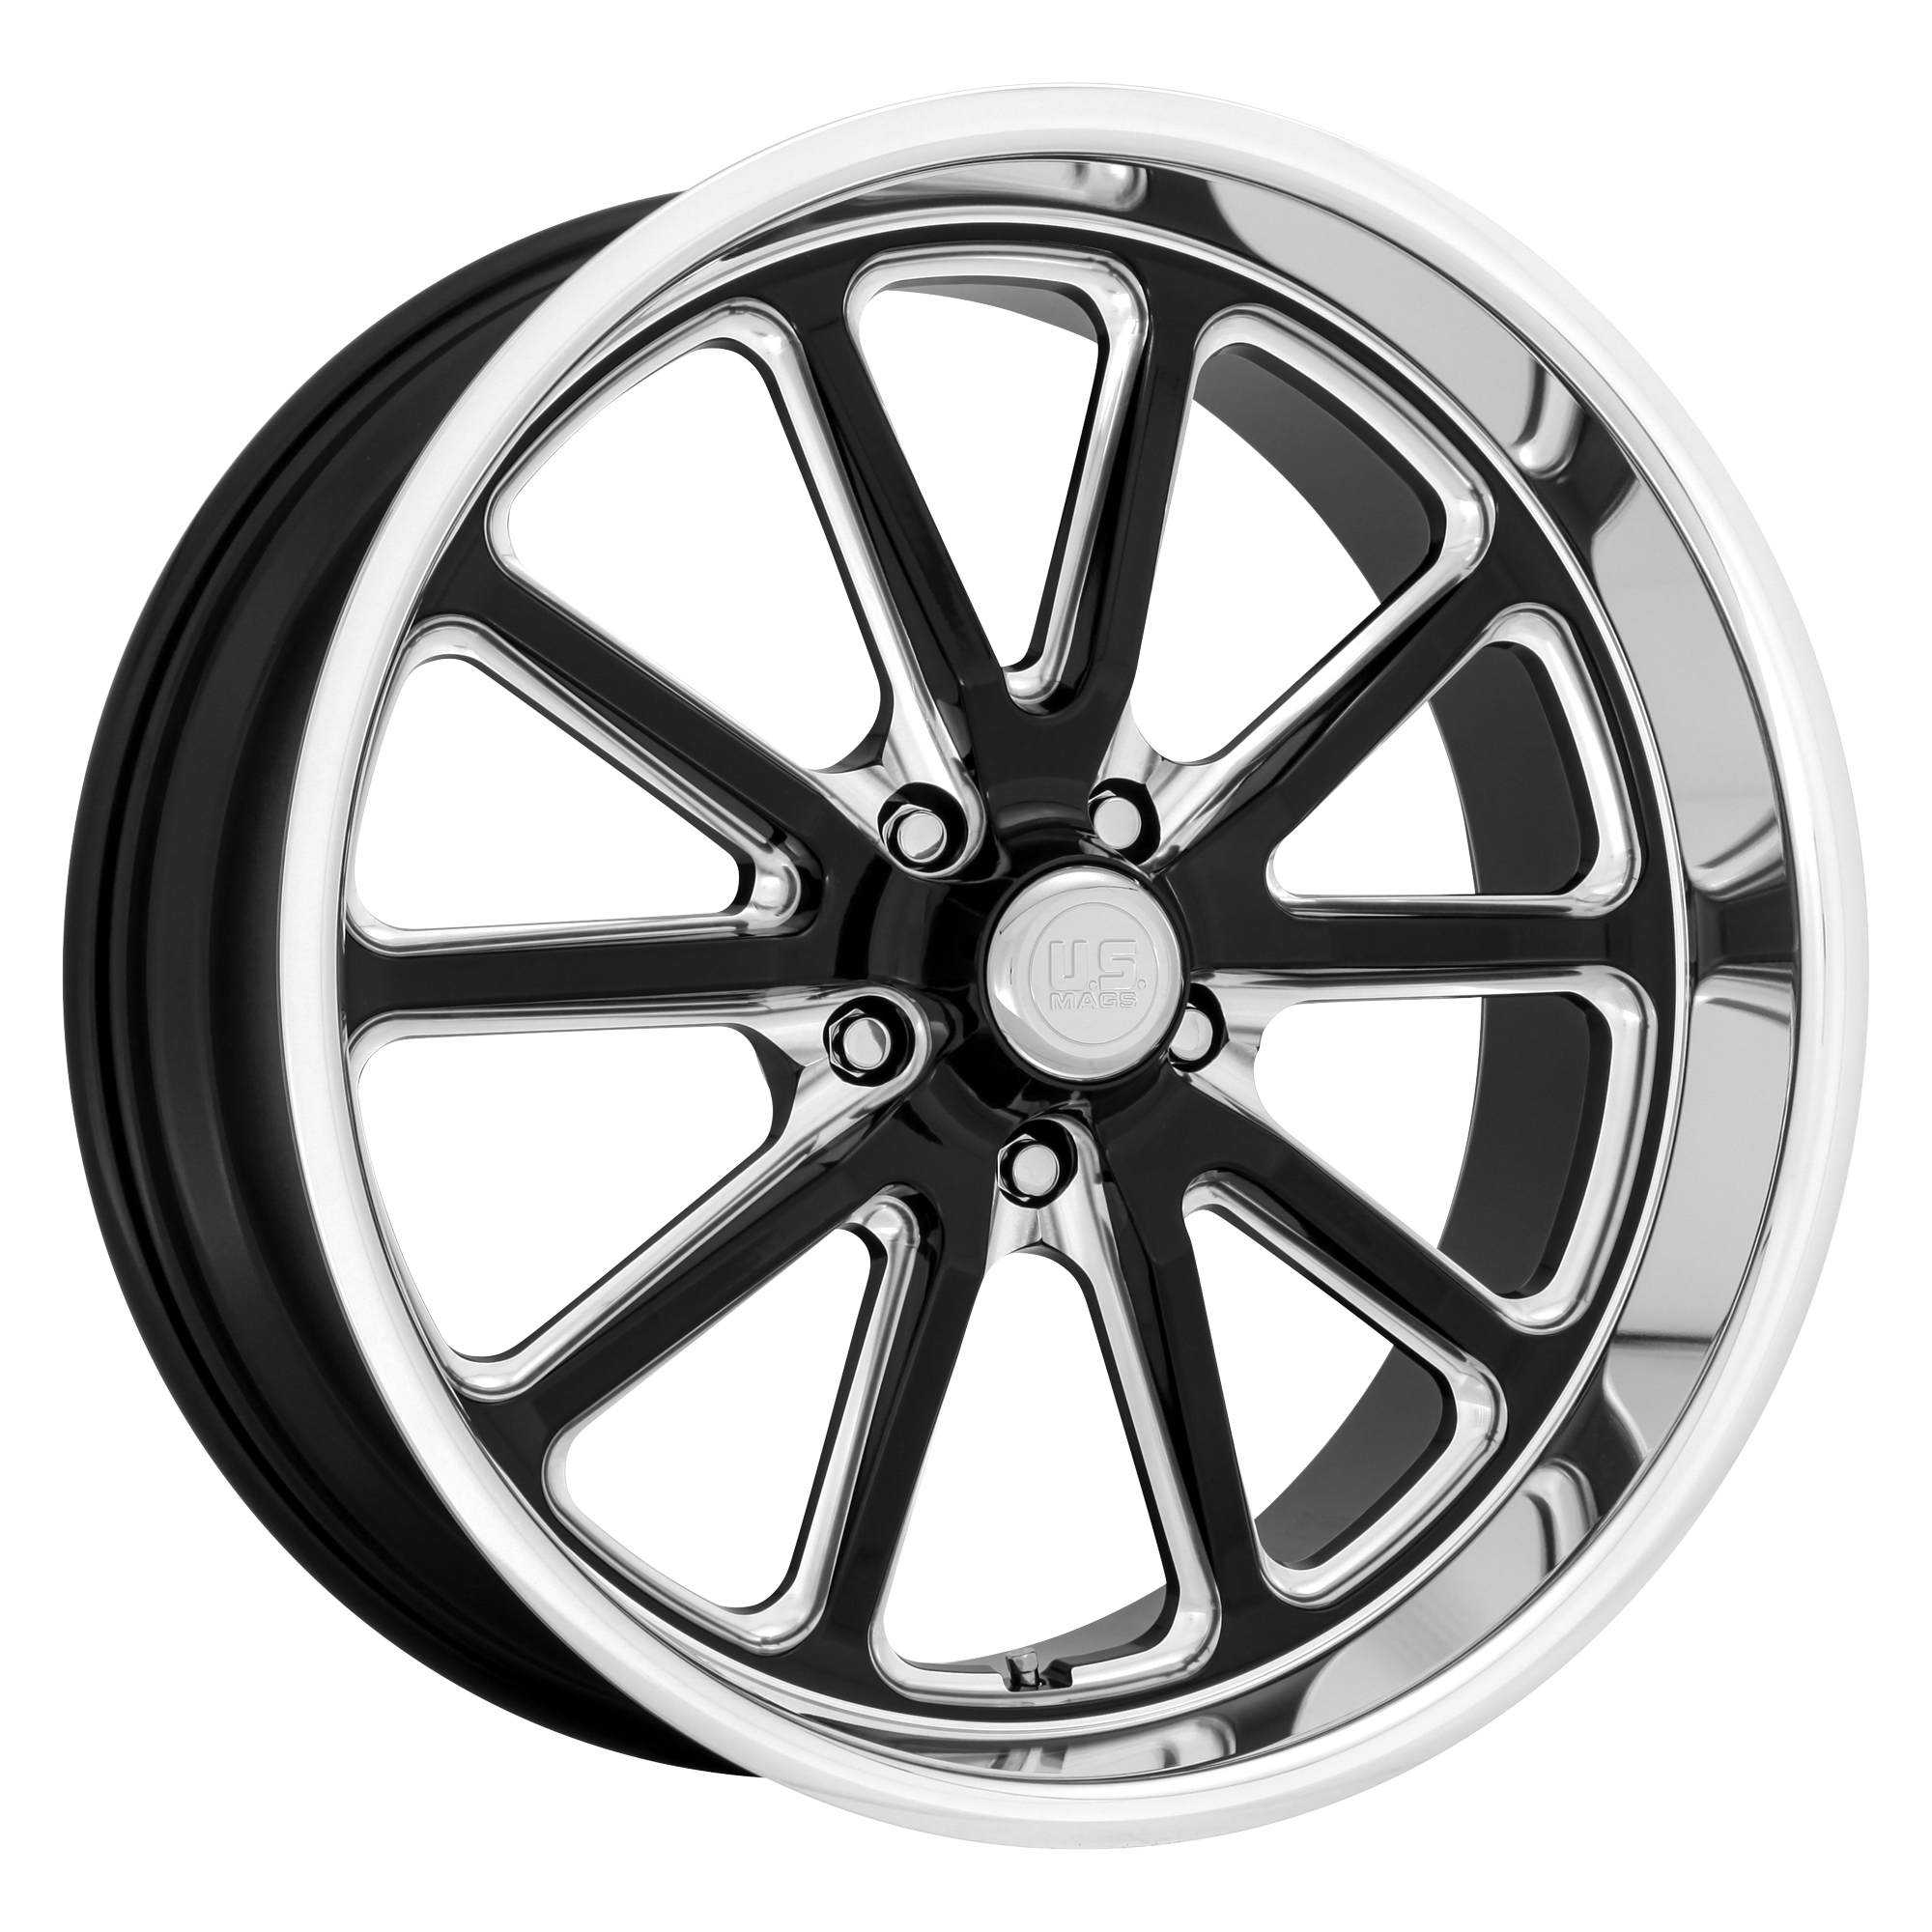 RAMBLER 18x8 5x120.65 GLOSS BLACK MILLED (1 mm) - Tires and Engine Performance